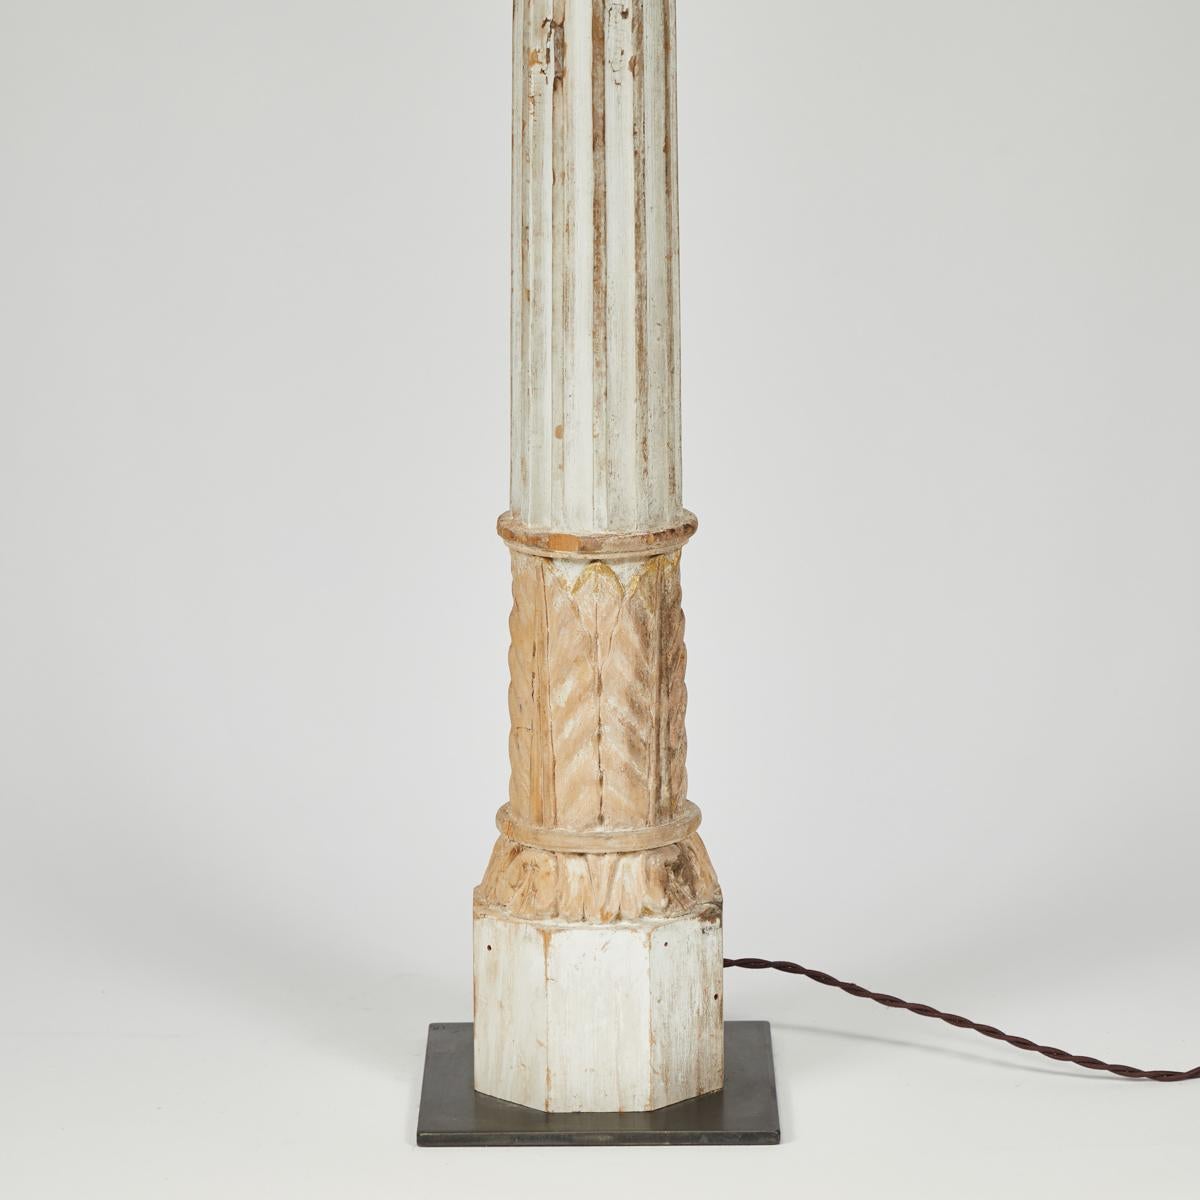 French Painted Acanthus Leaf-Carved and Fluted Column Lamp from 19th Century, France For Sale